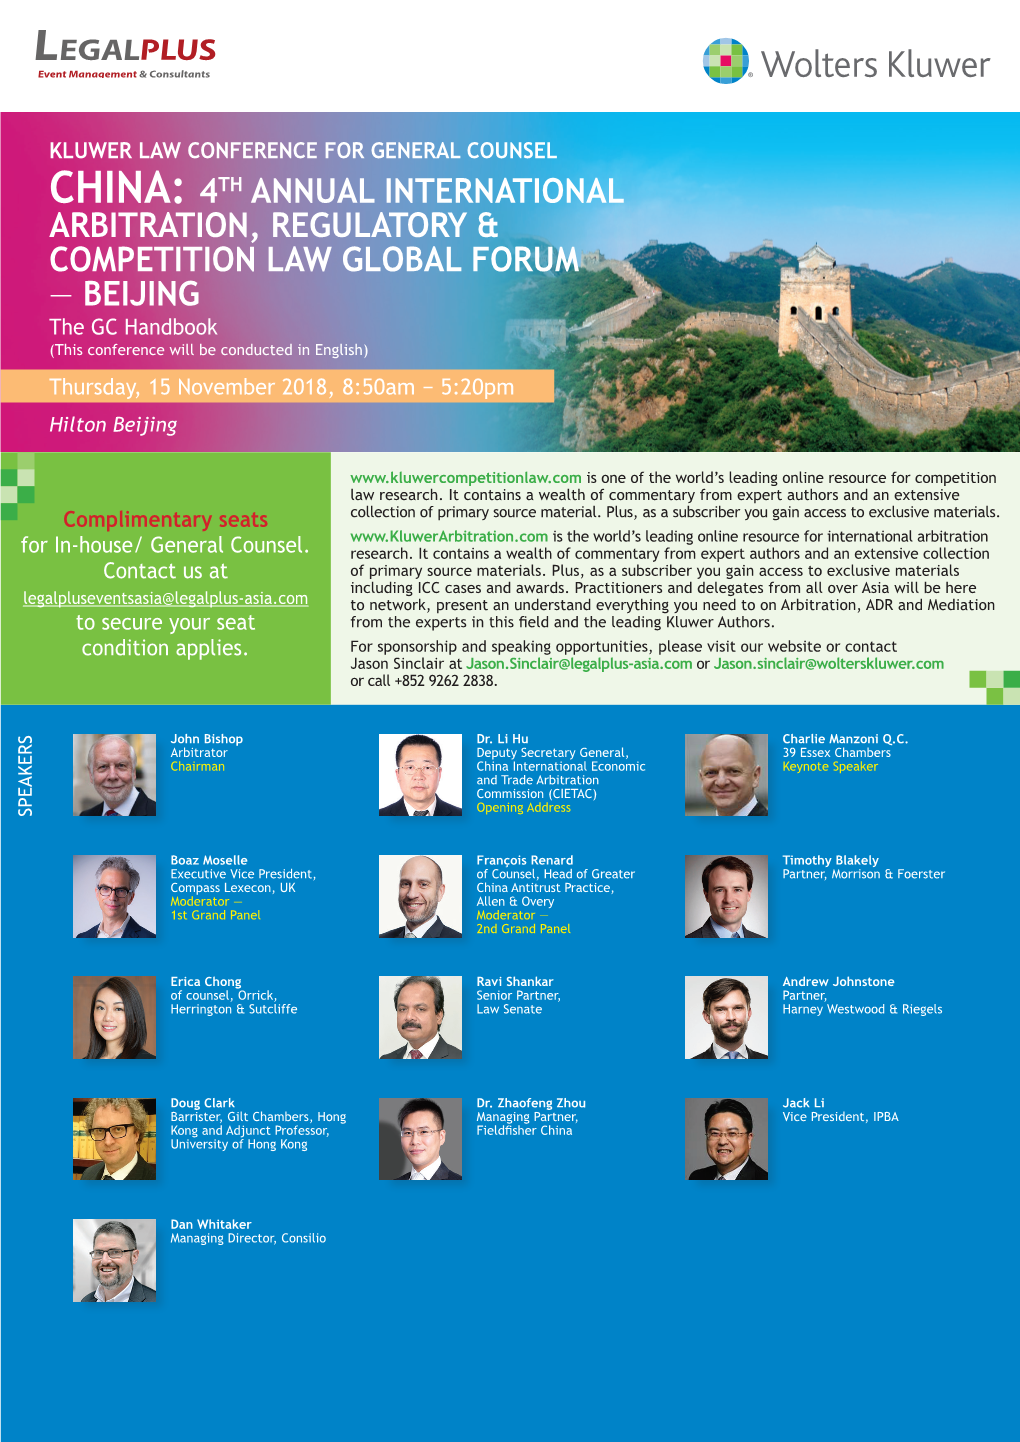 China: 4Th Annual International Arbitration, Regulatory & Competition Law Global Forum – Beijing